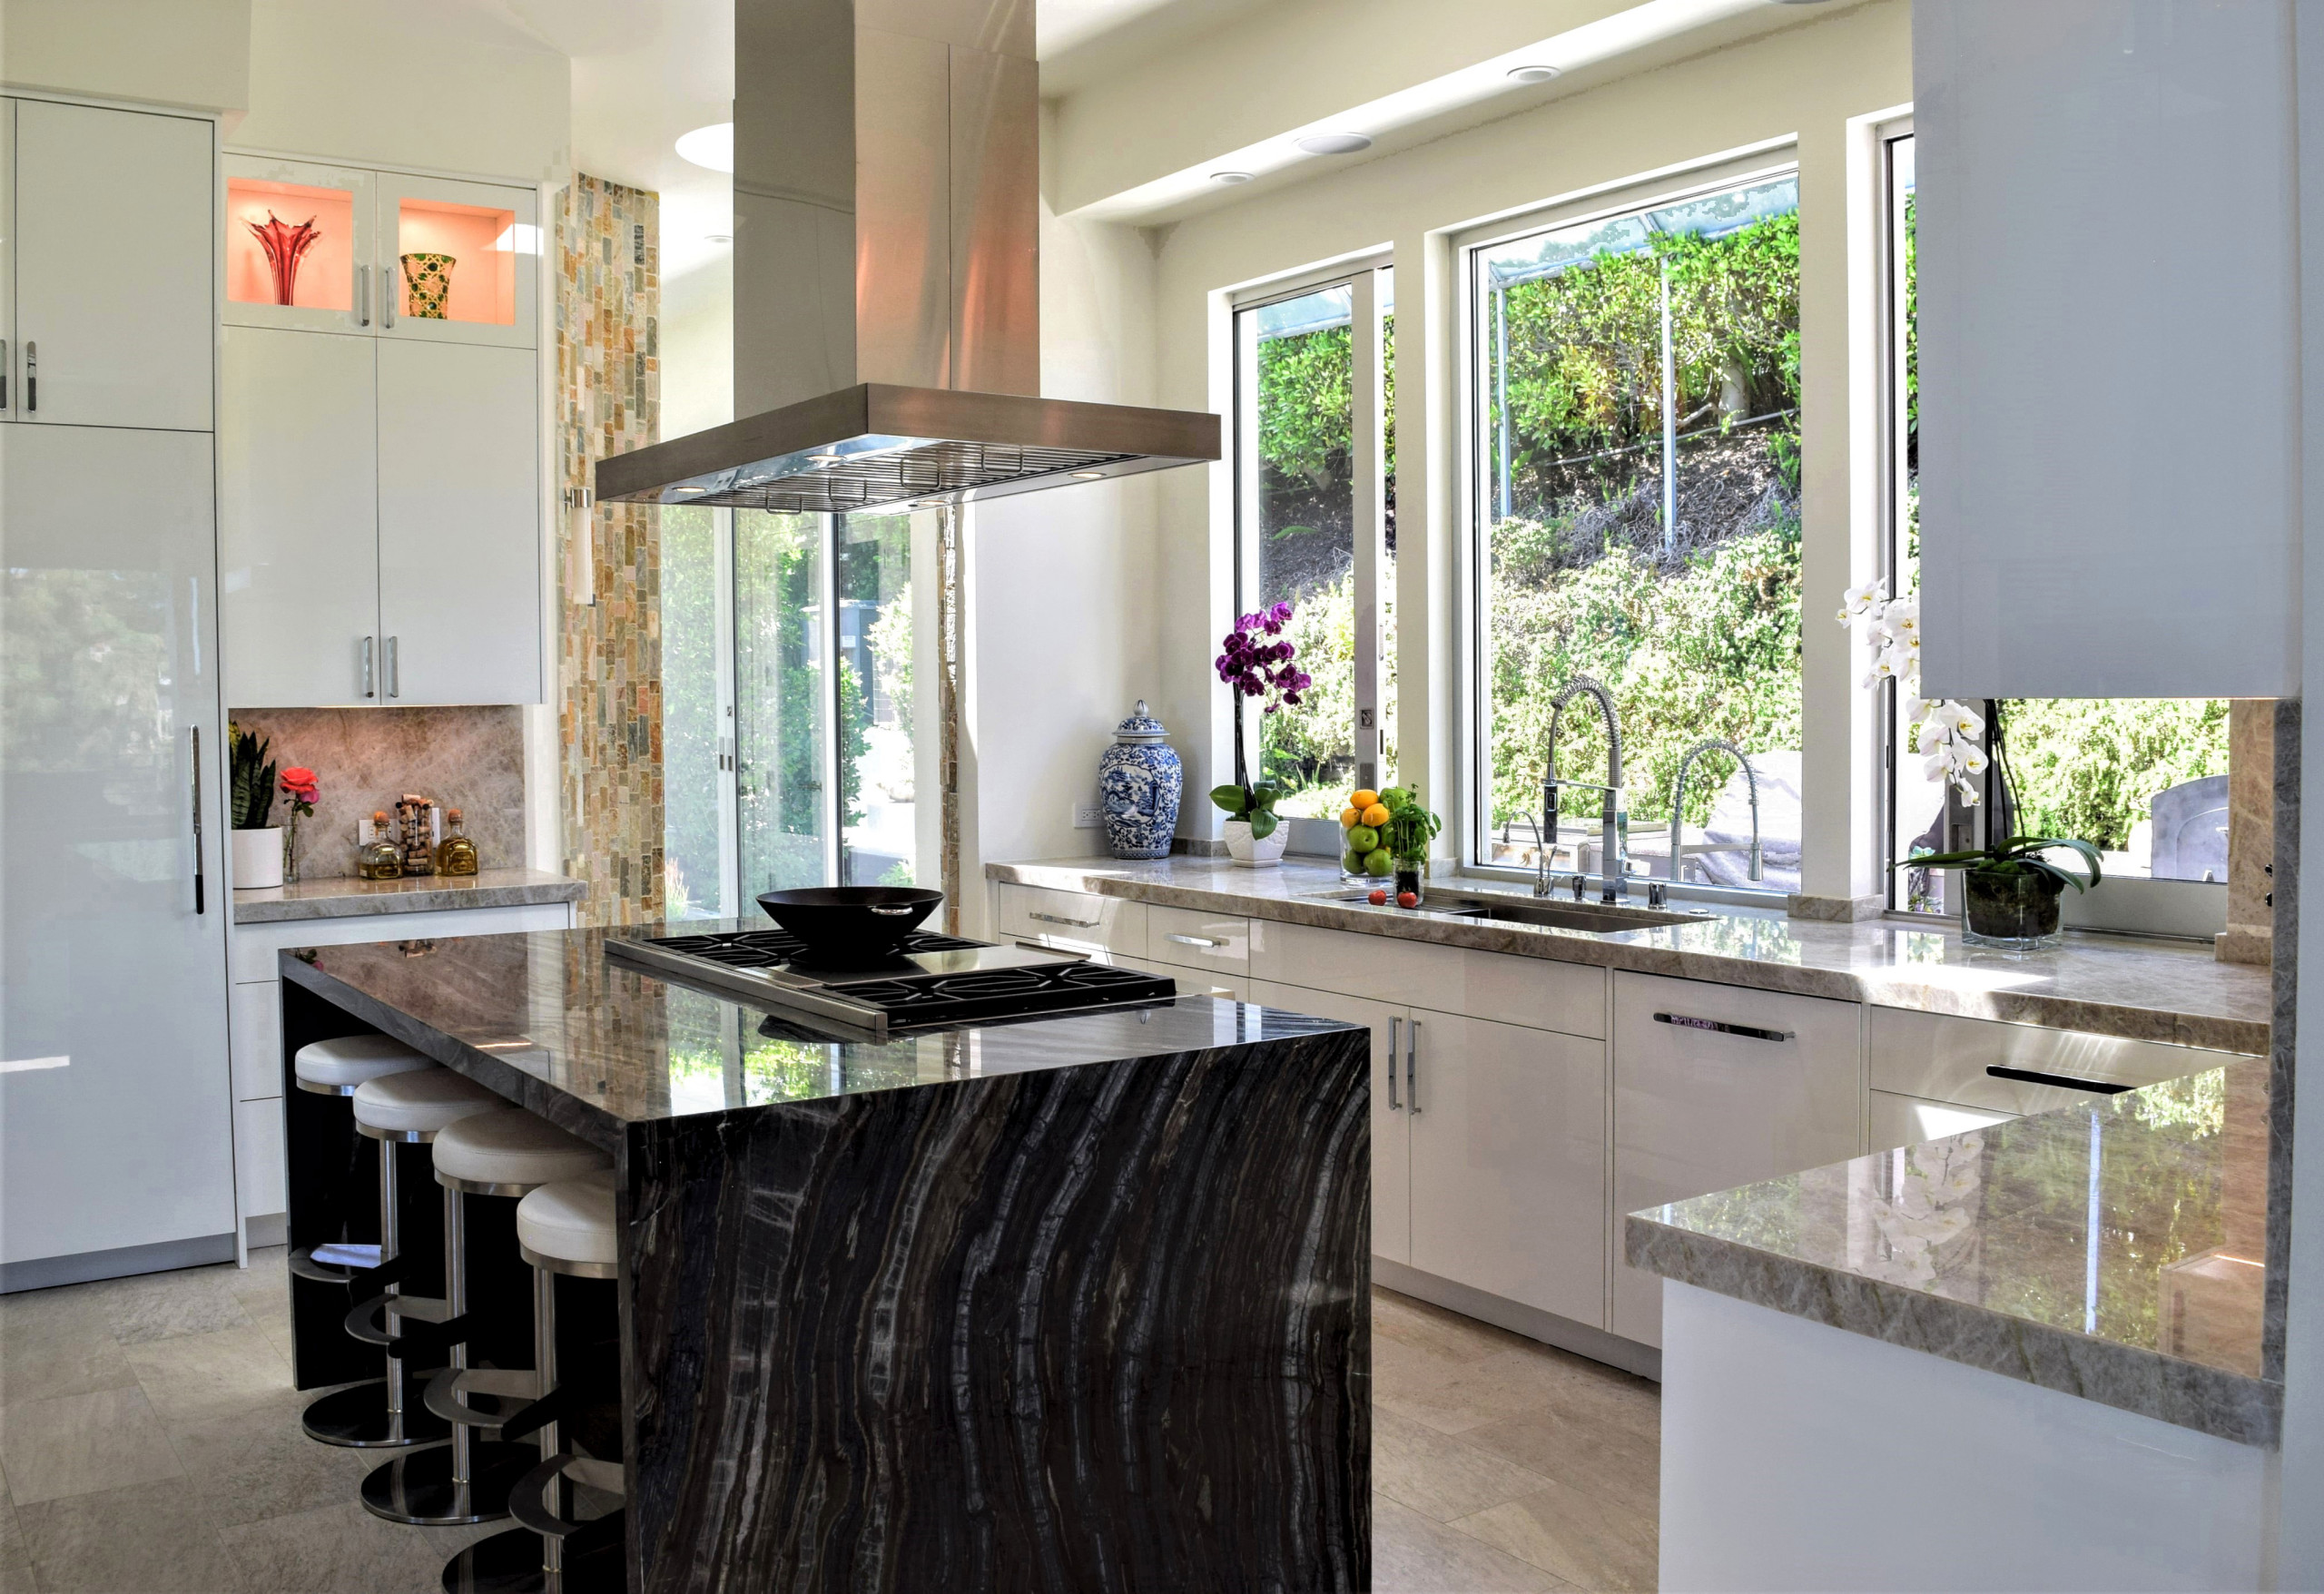 My Contemporary Kitchen Remodel For A Client in The Hollywood Hills Bird Streets